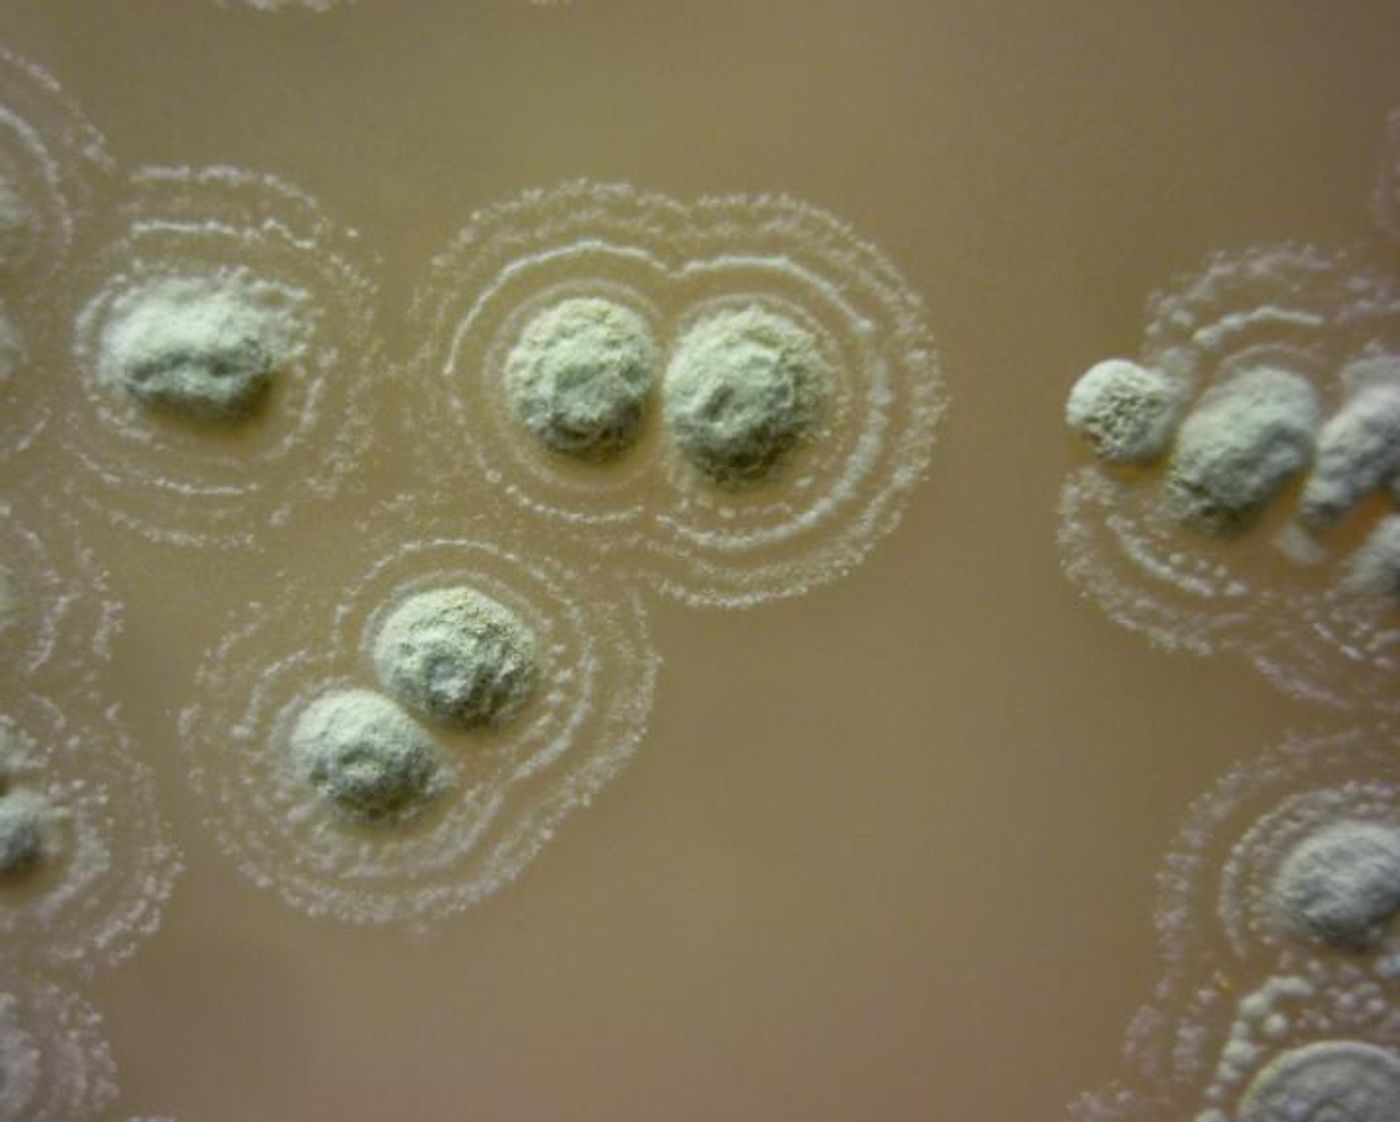 Growth of the newly discovered Streptomyces sp. myrophorea, so named because it produces a distinctive fragrance similar to that of oil of wintergreen. Although superficially resembling fungi, Streptomyces are true bacteria and are the source of two-thirds of the various frontline antibiotics used in medicine. / Credit: G Quinn, Swansea University